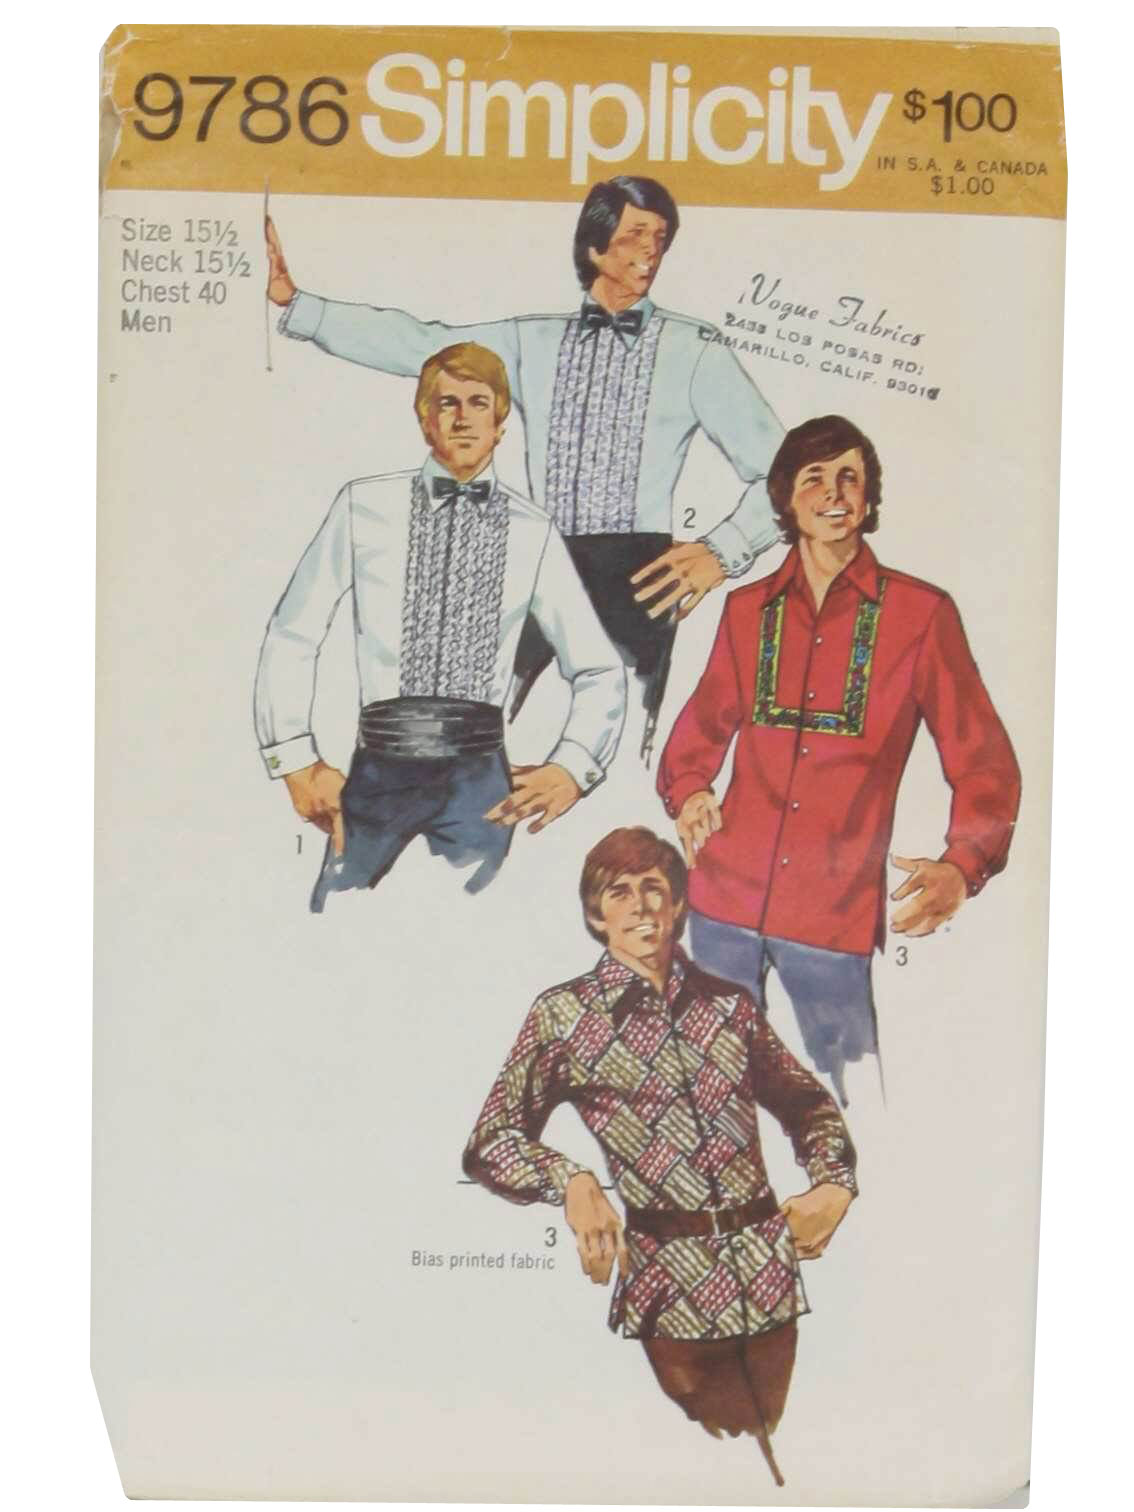 1970s Simplicity 9786 Sewing Pattern: 1971 -Simplicity 9786- Mens ...